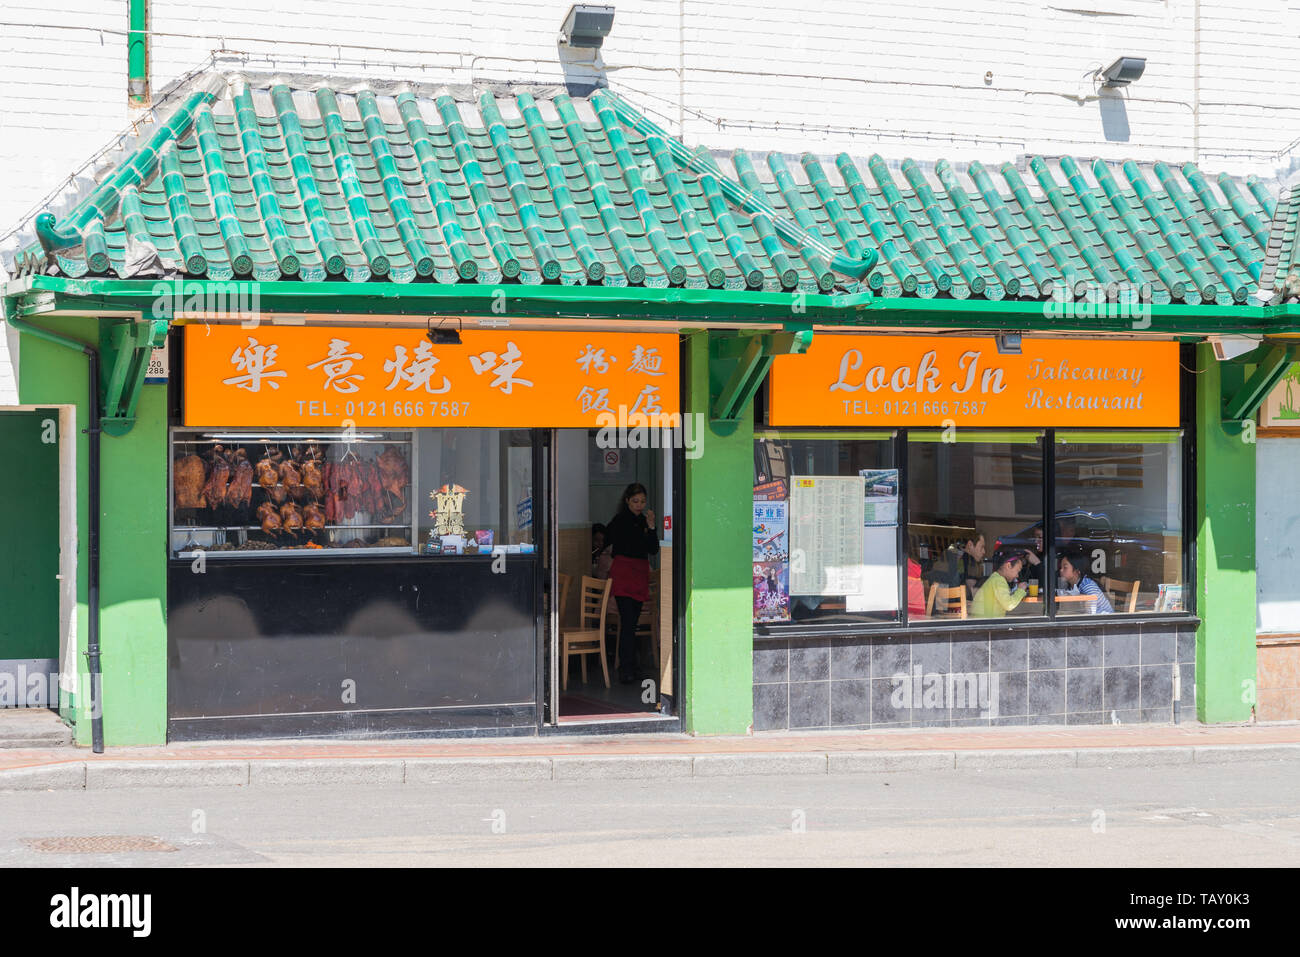 Look In Takeaway Restaurant in Birmingham's Chinatown which serves cantonese food and barbecued meats and duck Stock Photo